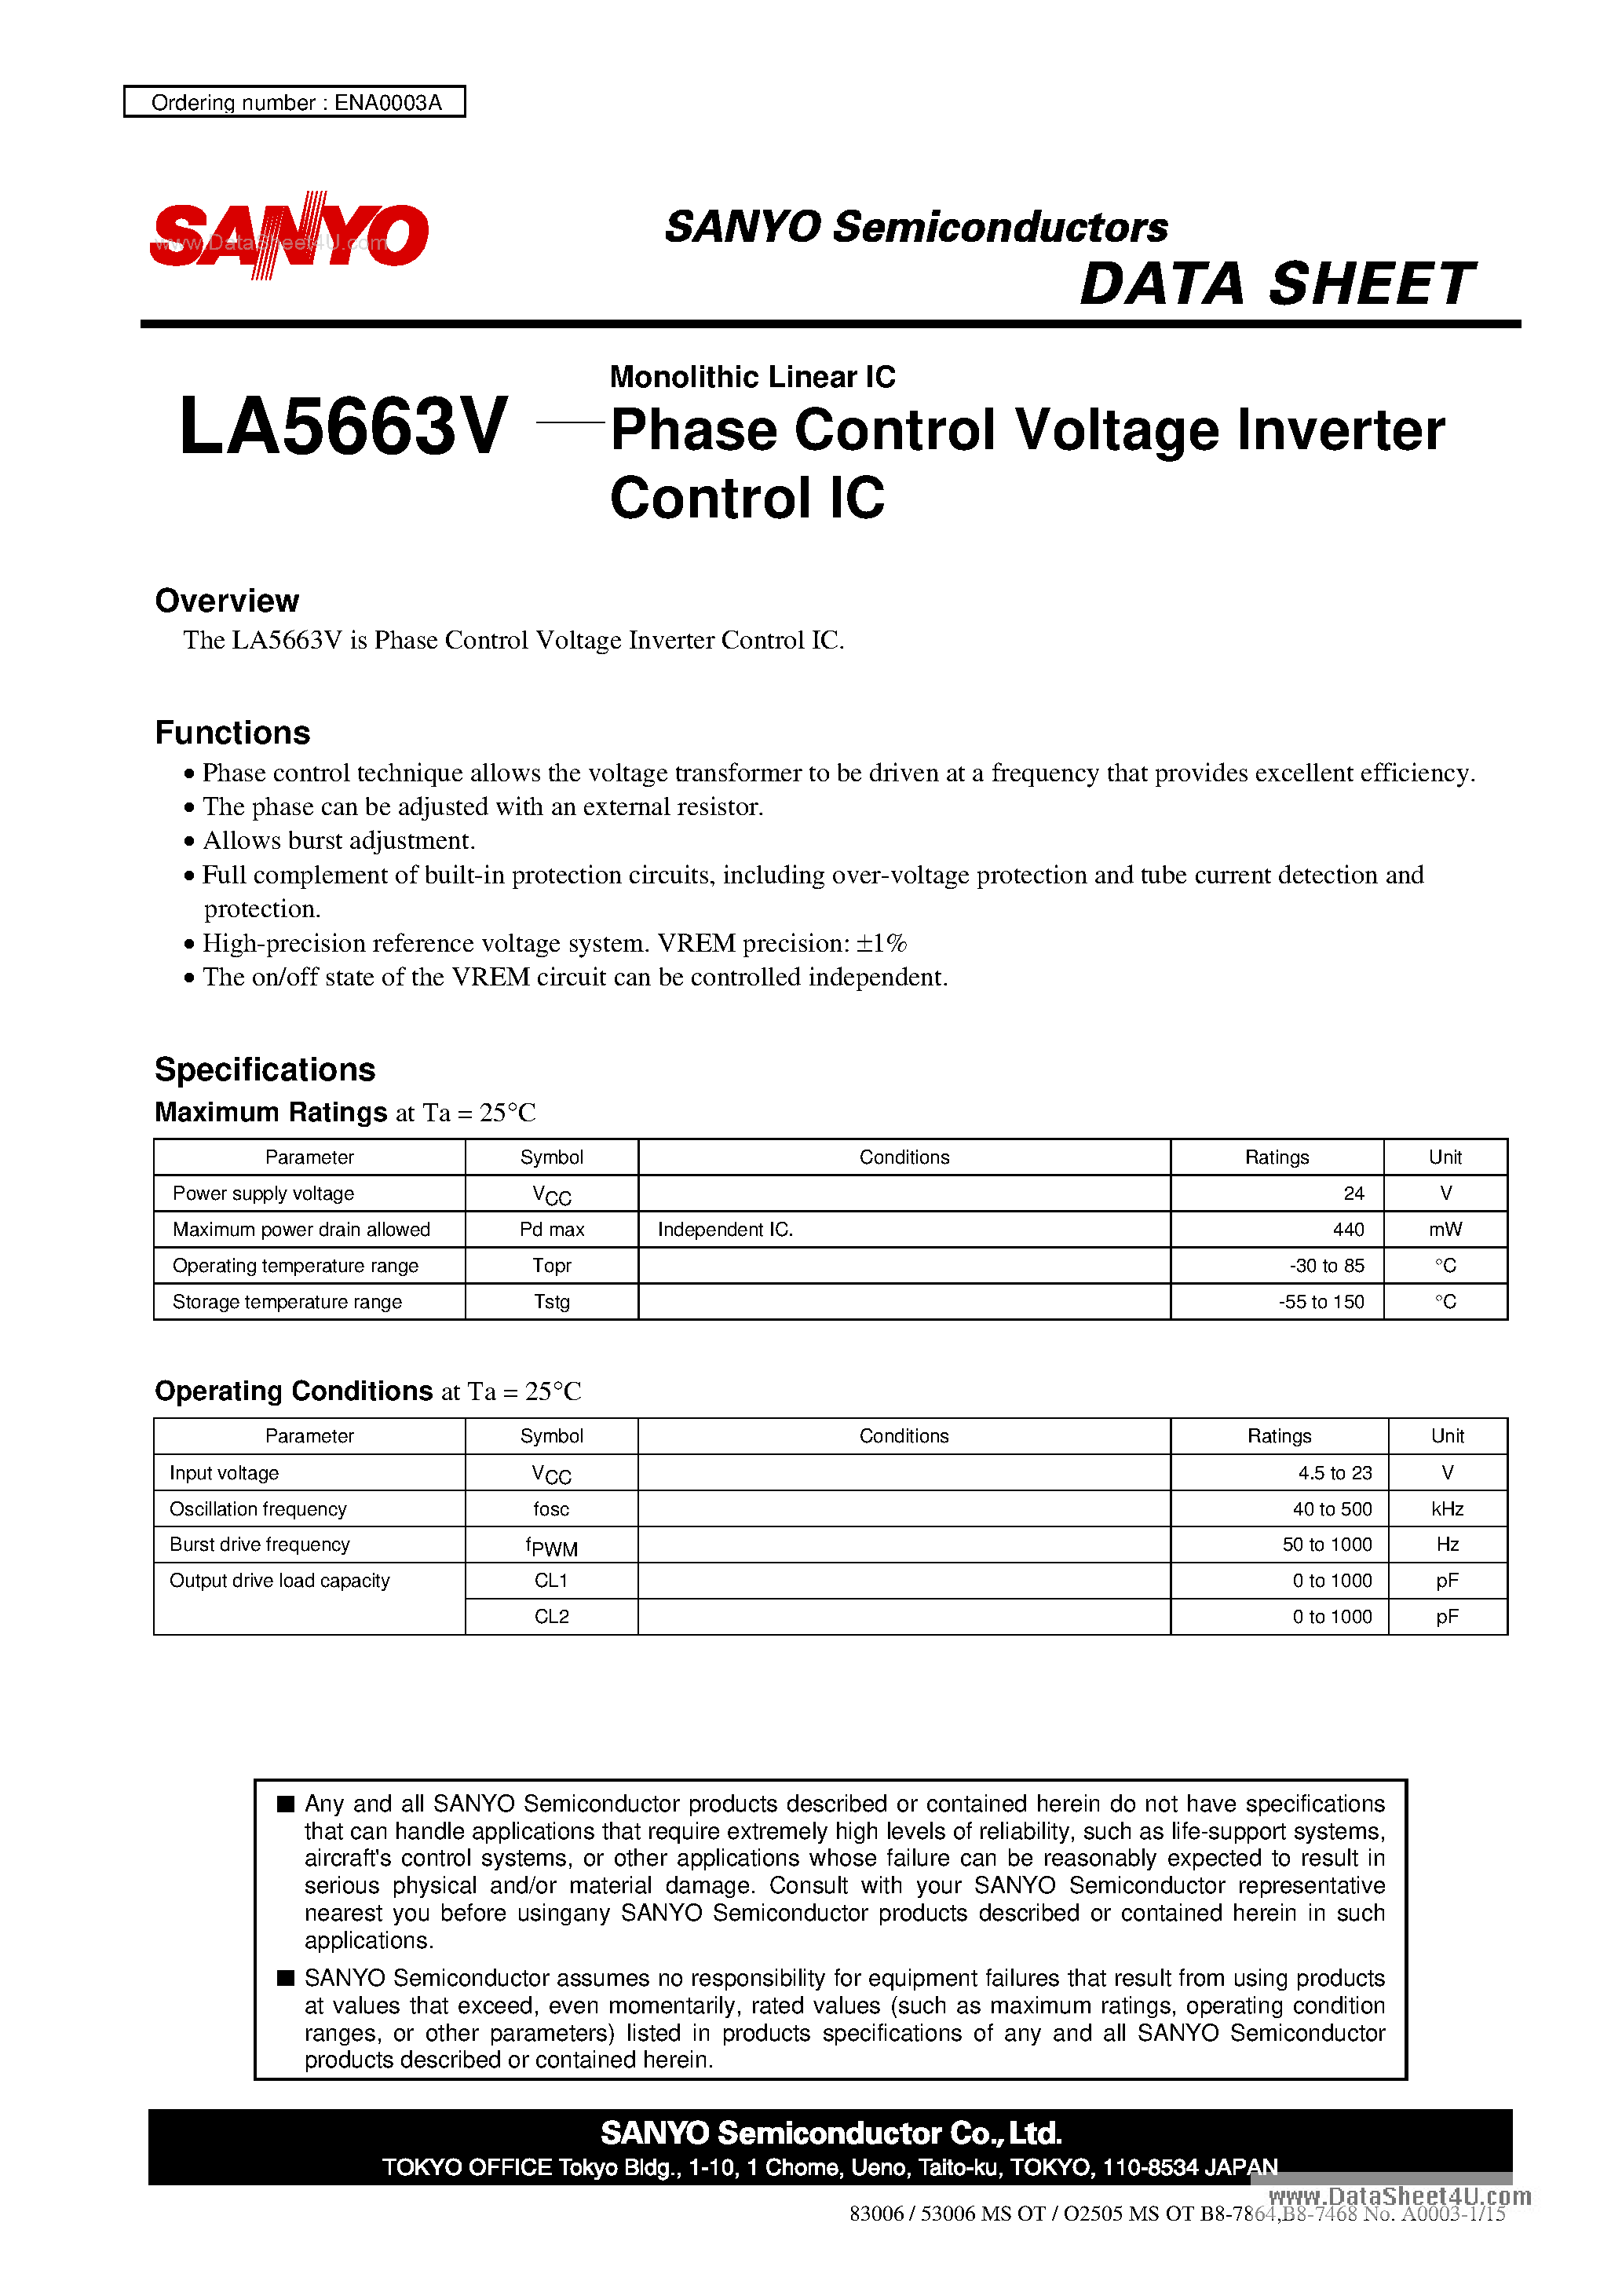 Datasheet LA5663V - Monolithic Linear IC Phase Control Voltage Inverter Control IC page 1